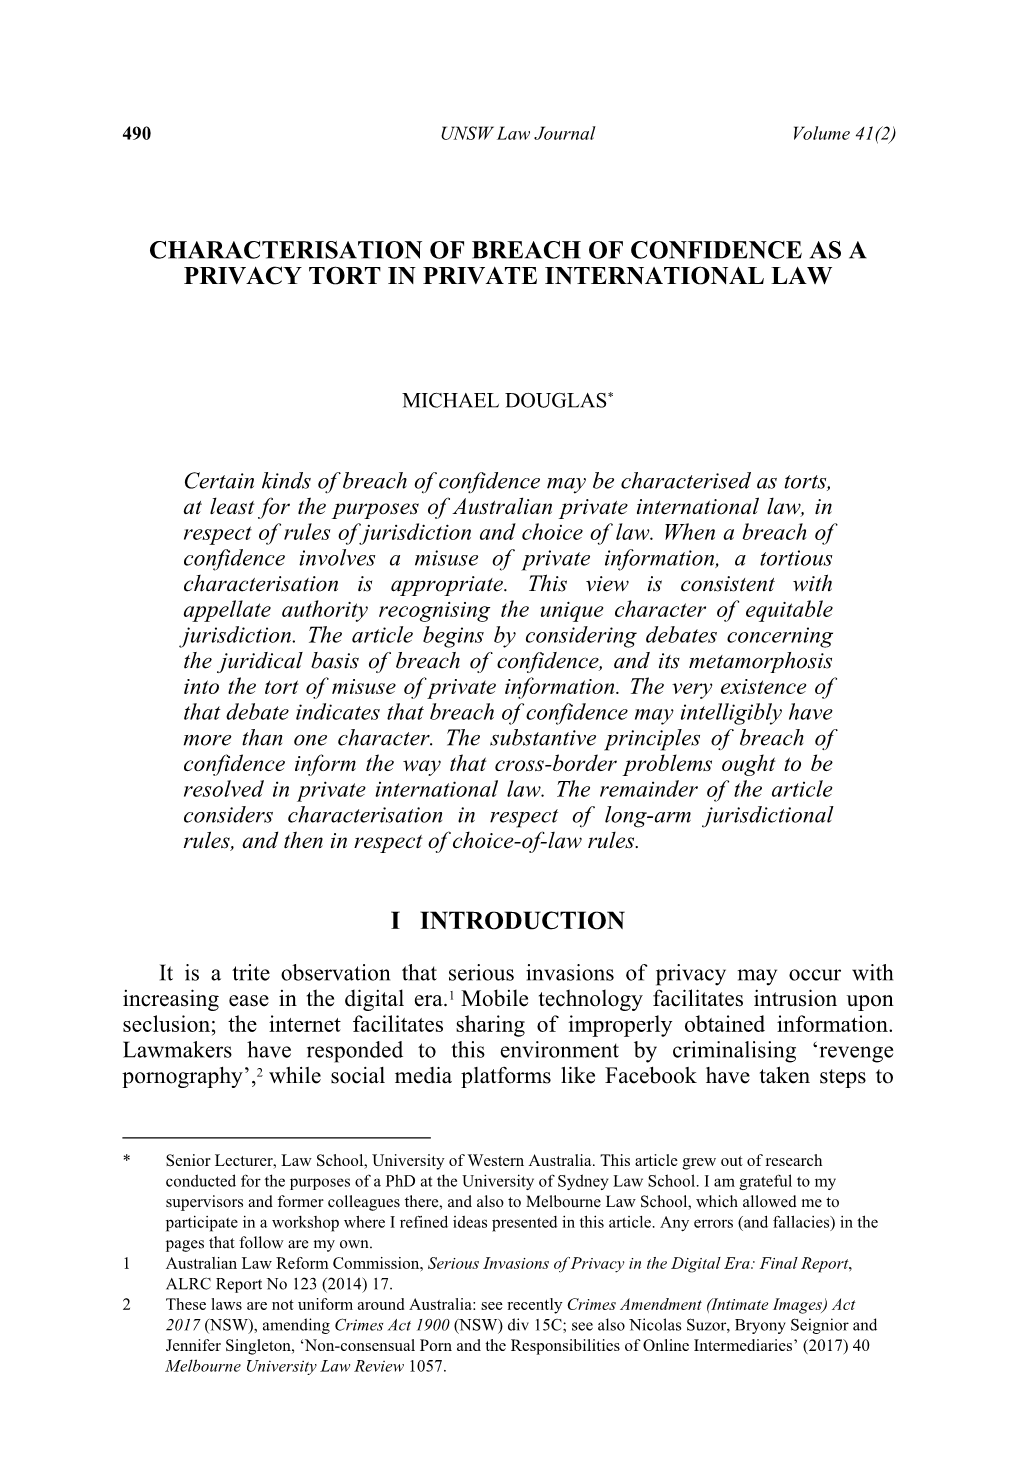 Characterisation of Breach of Confidence As a Privacy Tort in Private International Law